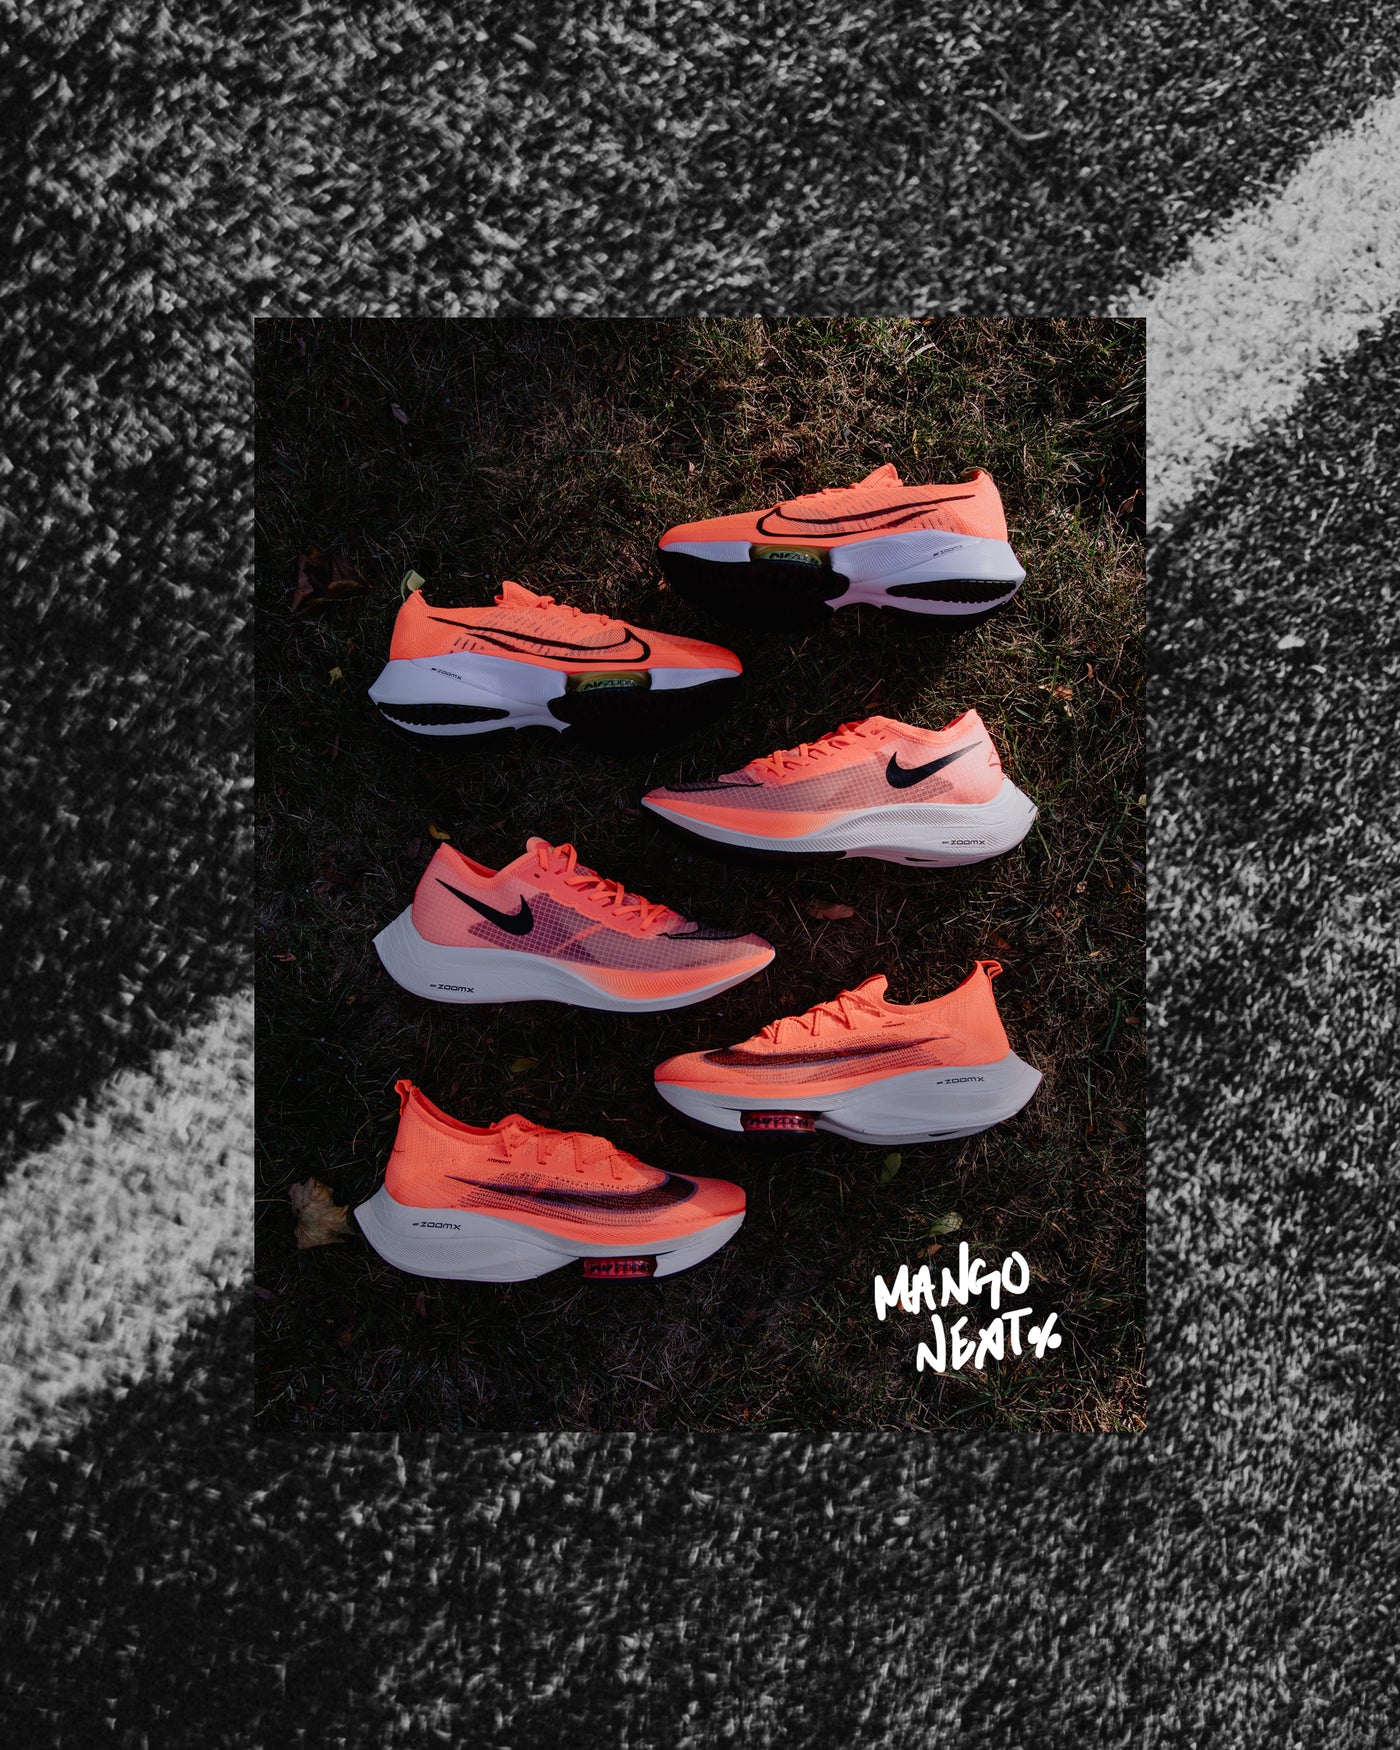 RELEASE DAY: Nike Bright Mango Fast Pack